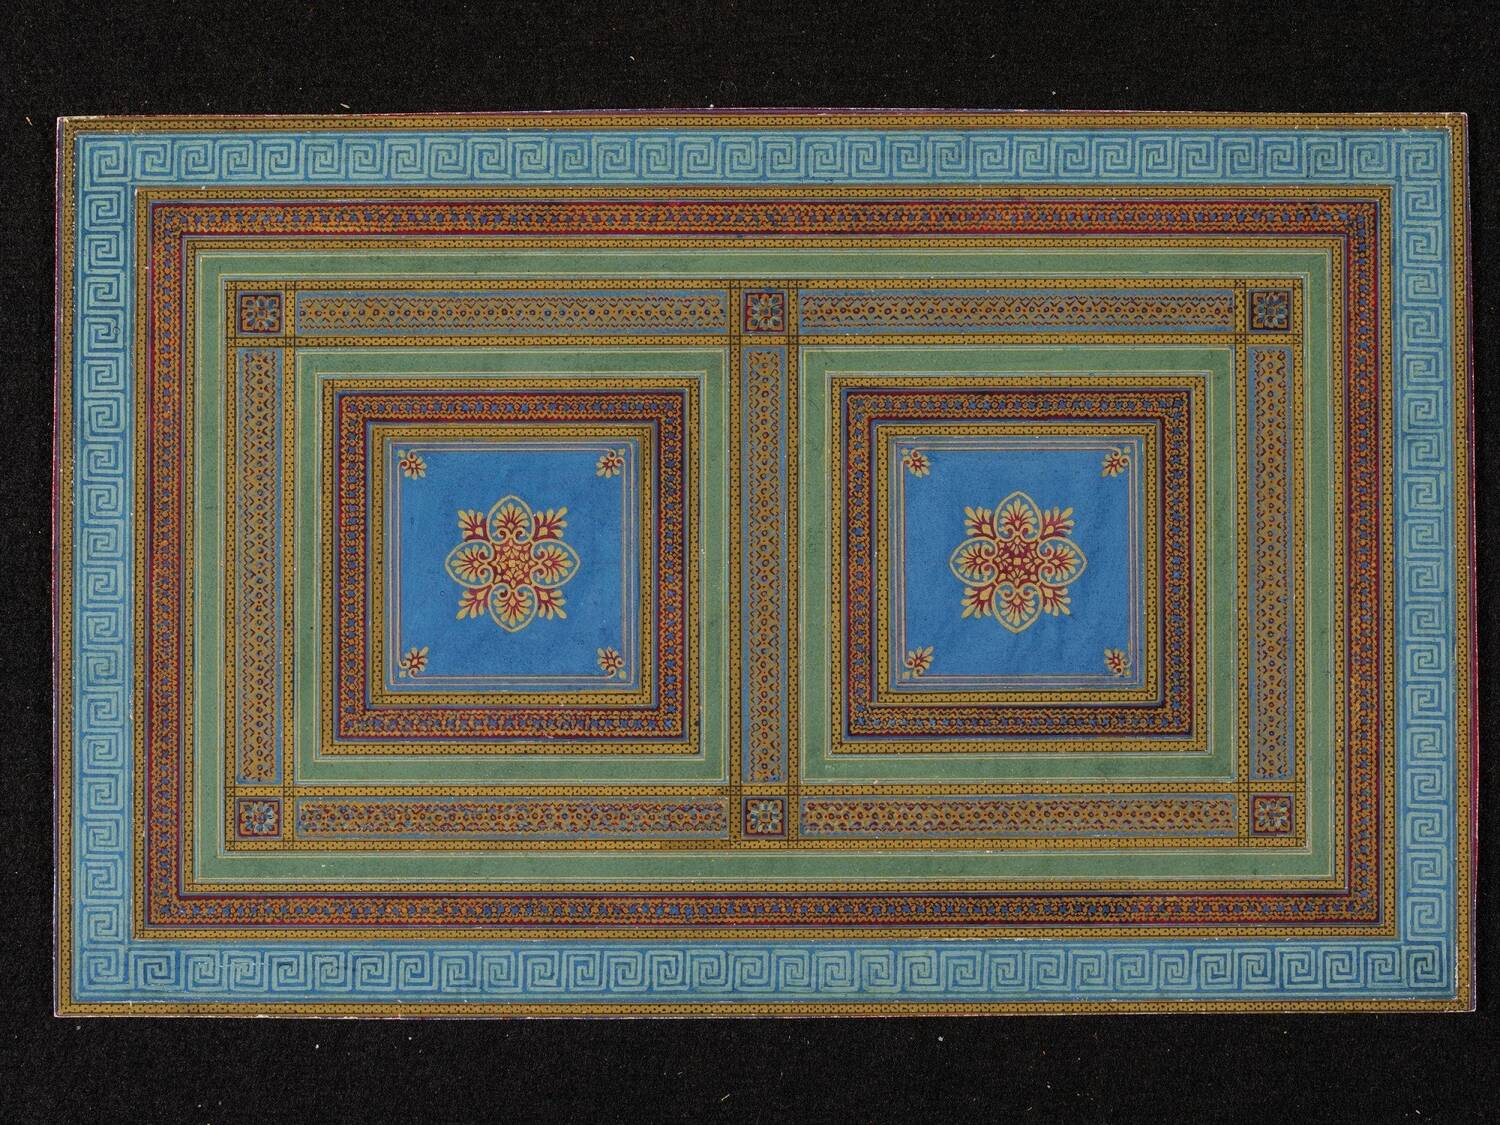 A large rectangular piece of carpet is displayed against a black background. The carpet features concentric squares of blue, green, yellow and red, some with classical patterns inside. At the centre are two blue squares with a floral design.